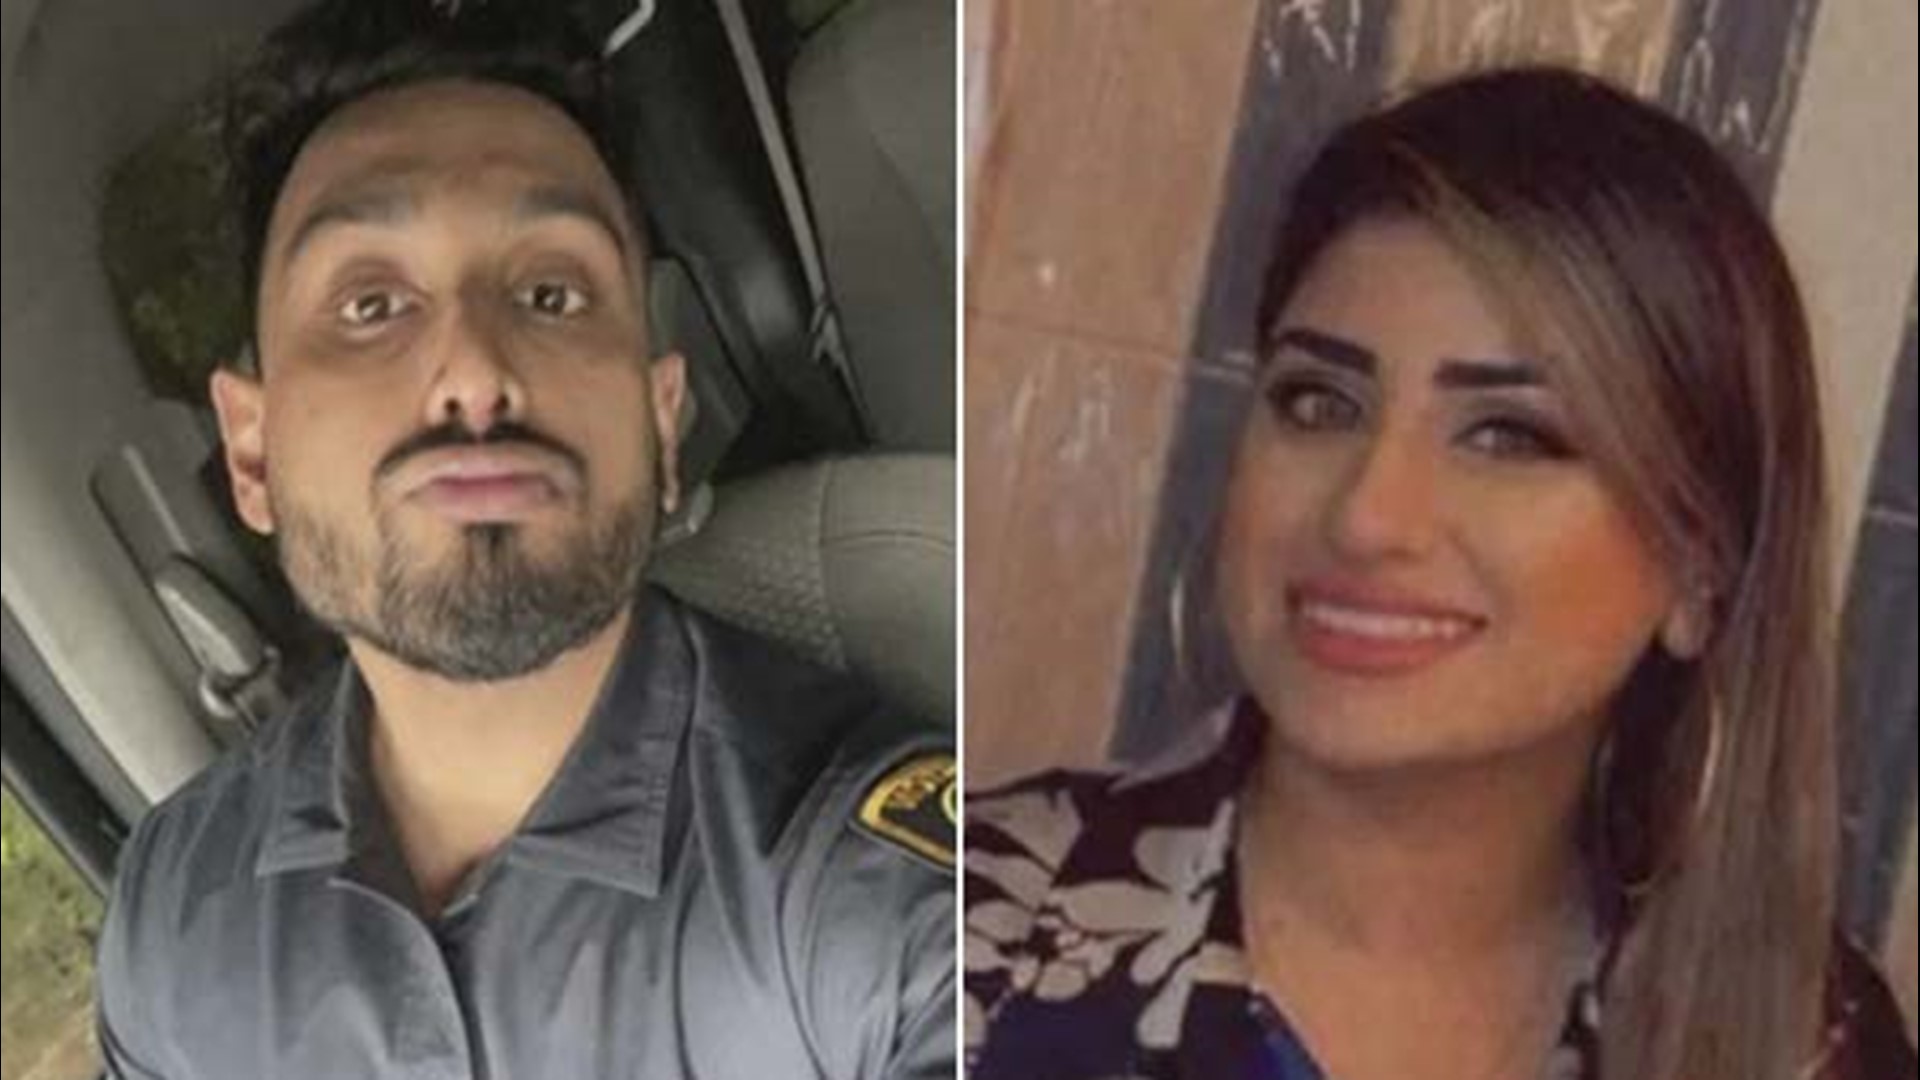 Investigators said Houston police officer Galib Chowdhury shot his wife, Sadaf Iqbal, in the face with a rifle last week. He claimed it was an accident.